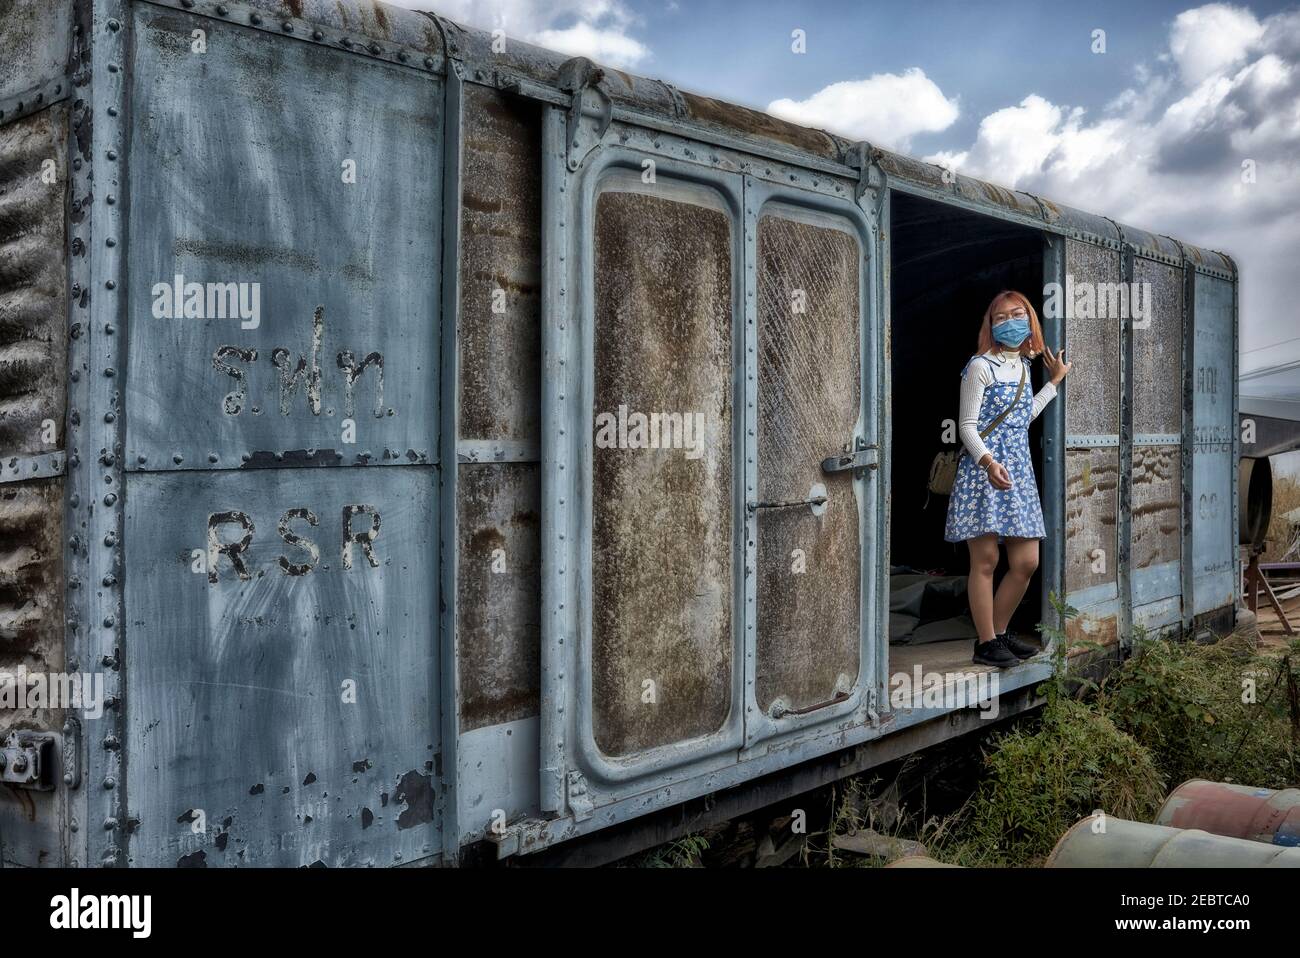 Girl in a train scrap yard posing for a photograph inside a disused rusting vintage railway goods carriage. Thailand, Southeast Asia. Freight wagon Stock Photo